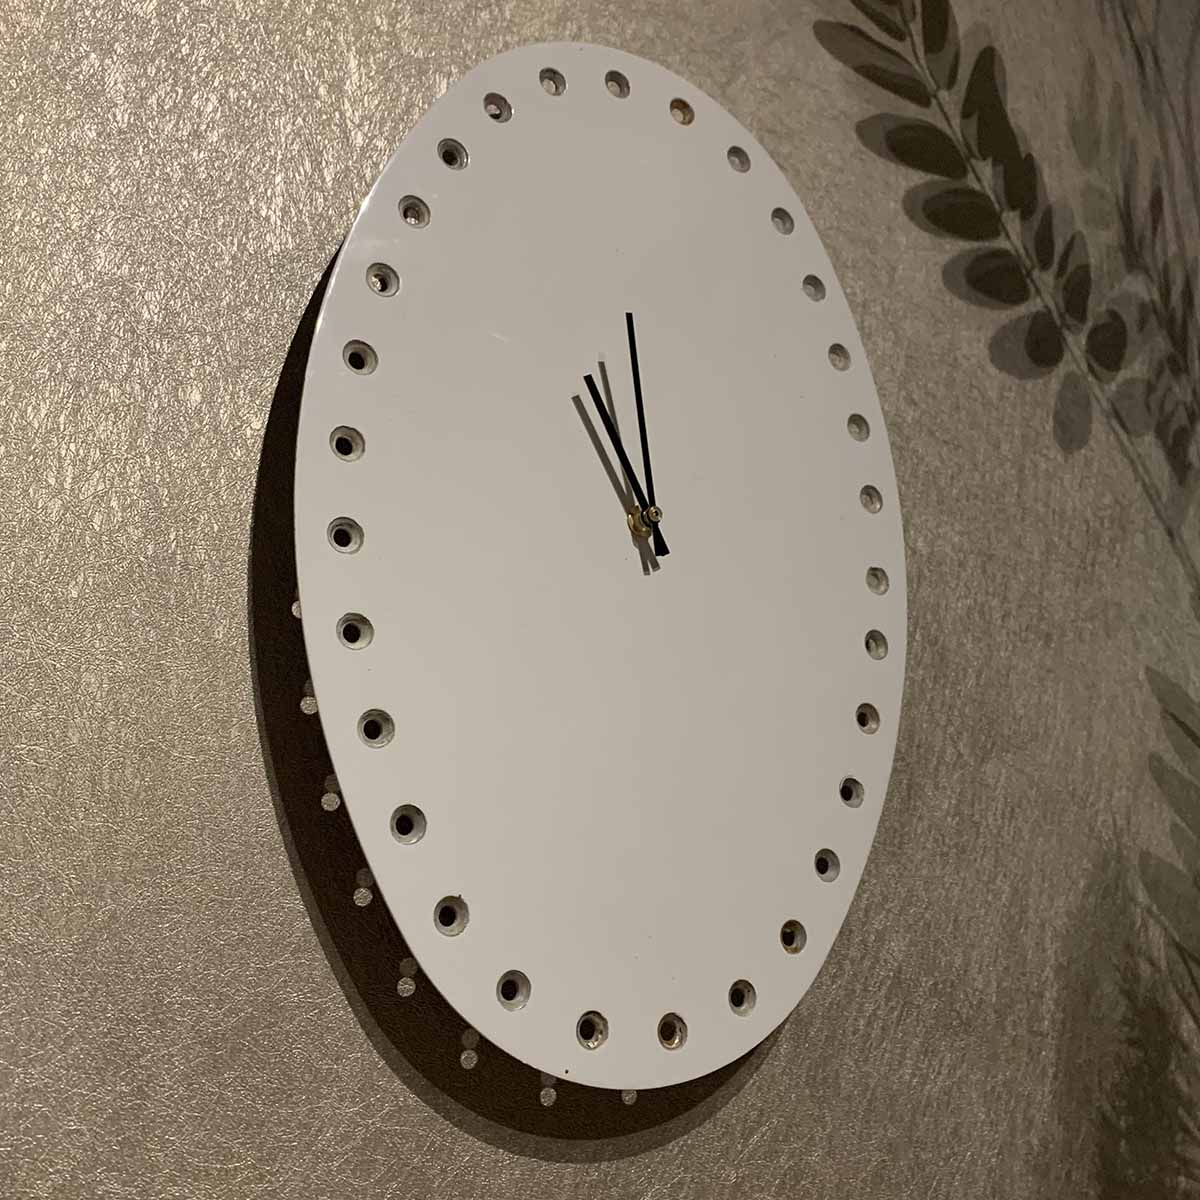 British Airways Airbus A318 fuel panel turned into a clock.